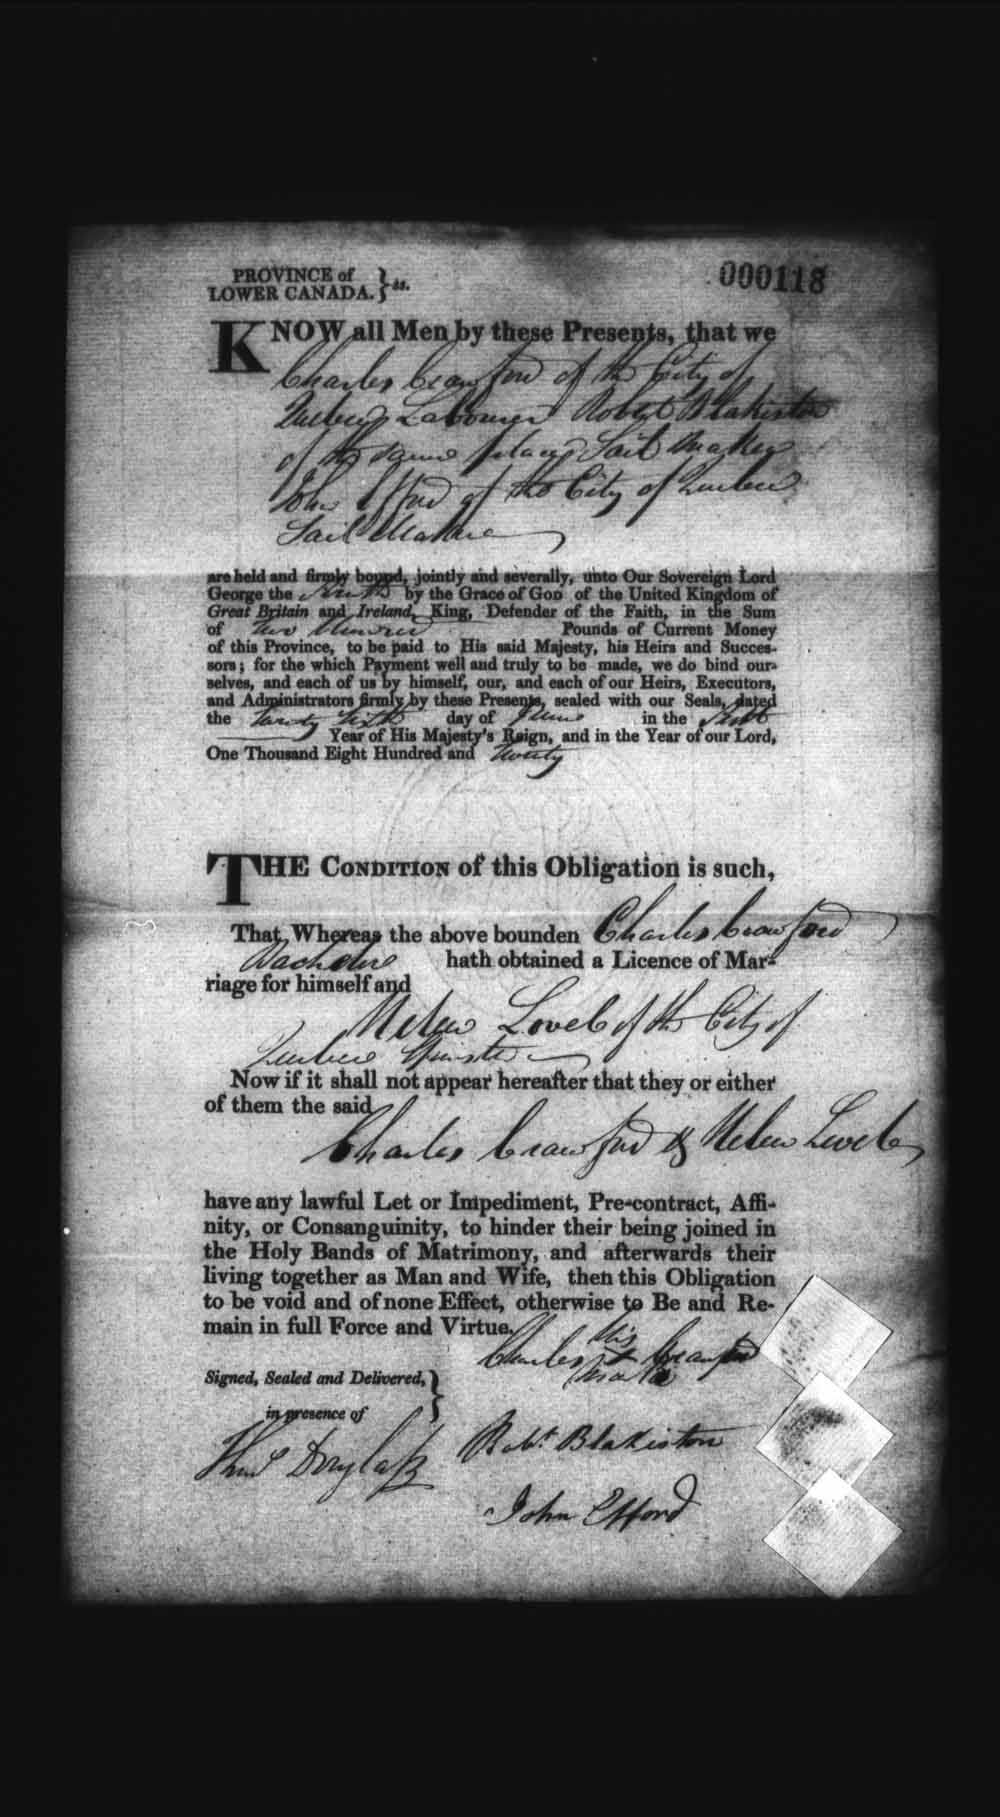 Digitized page of Upper and Lower Canada Marriage Bonds (1779-1865) for Image No.: e008235949